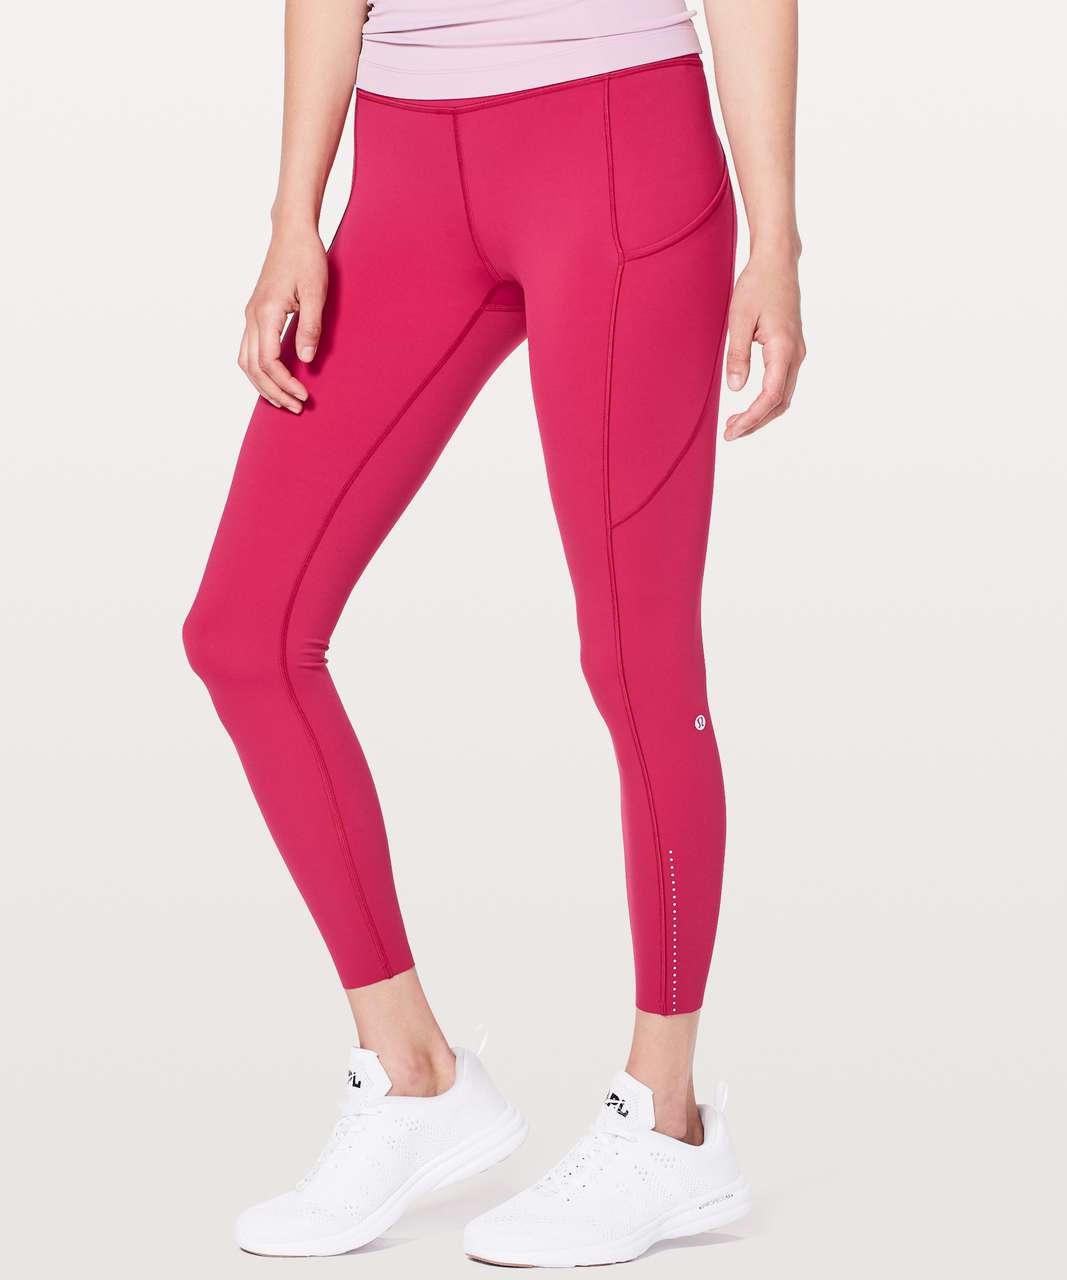 NWT Lululemon Fast Free HR Tight 25 Size 6 W5BXQS Red High Rise